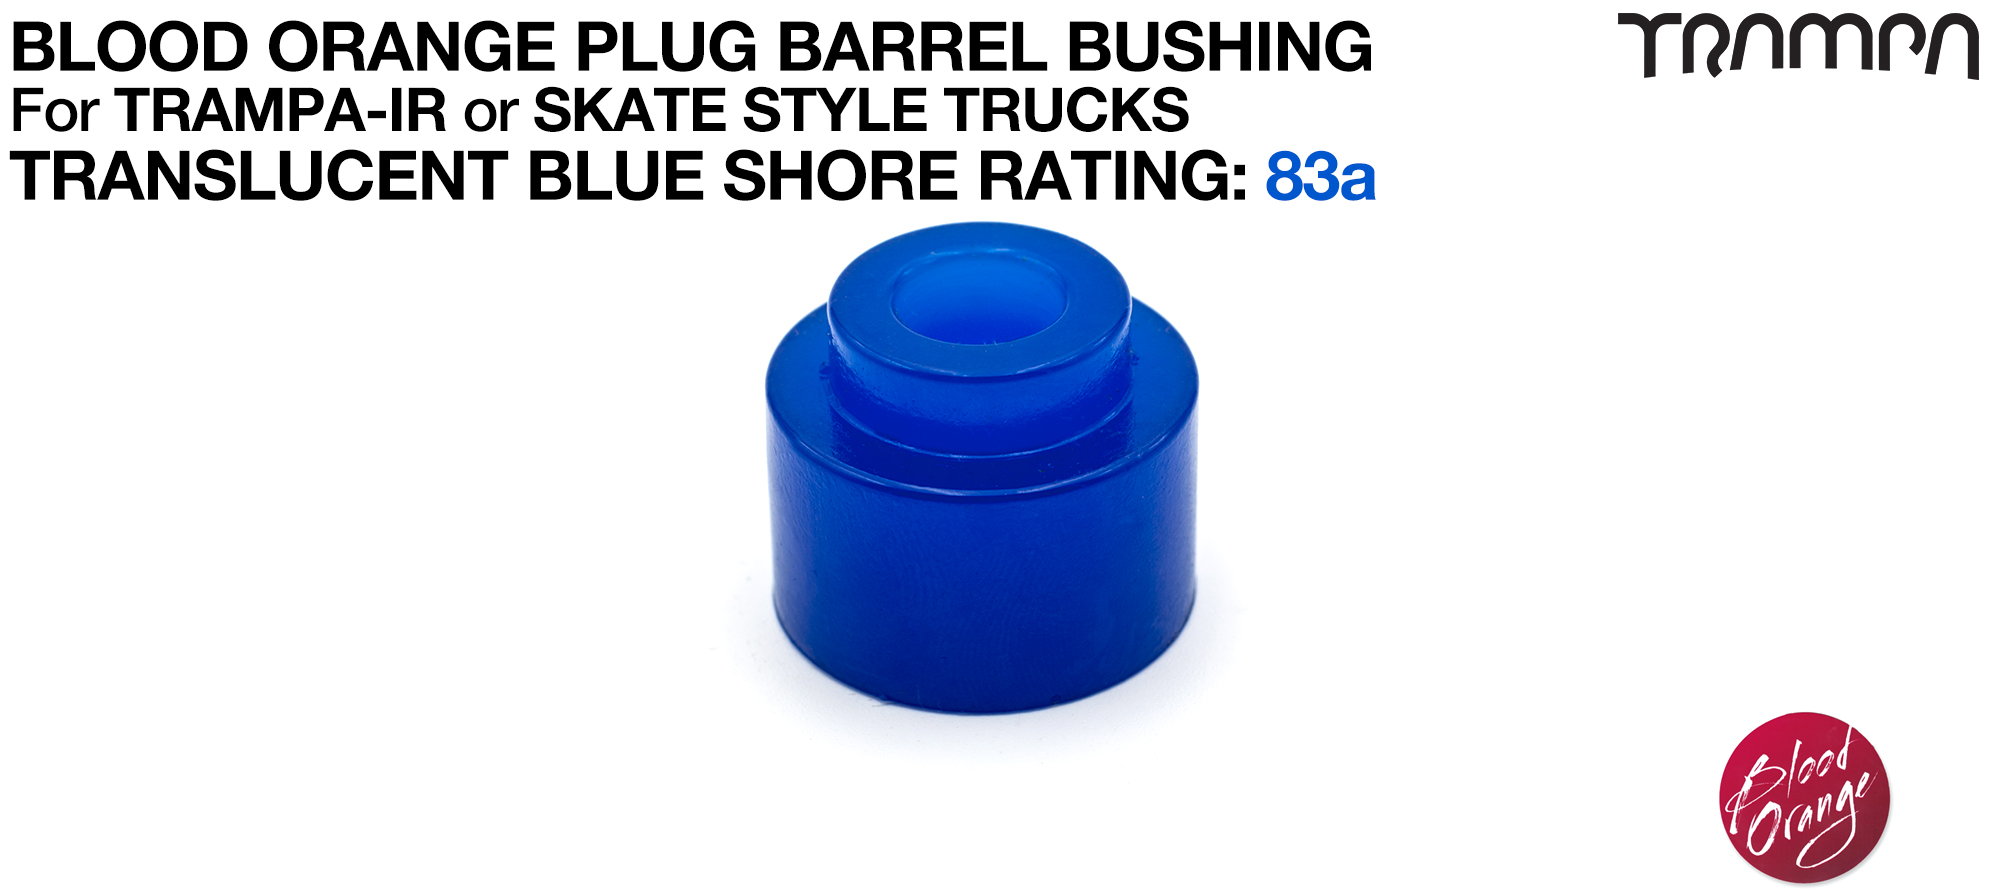 PLUG Bushing - Translucent BLUE 89a - OUT OF STOCK